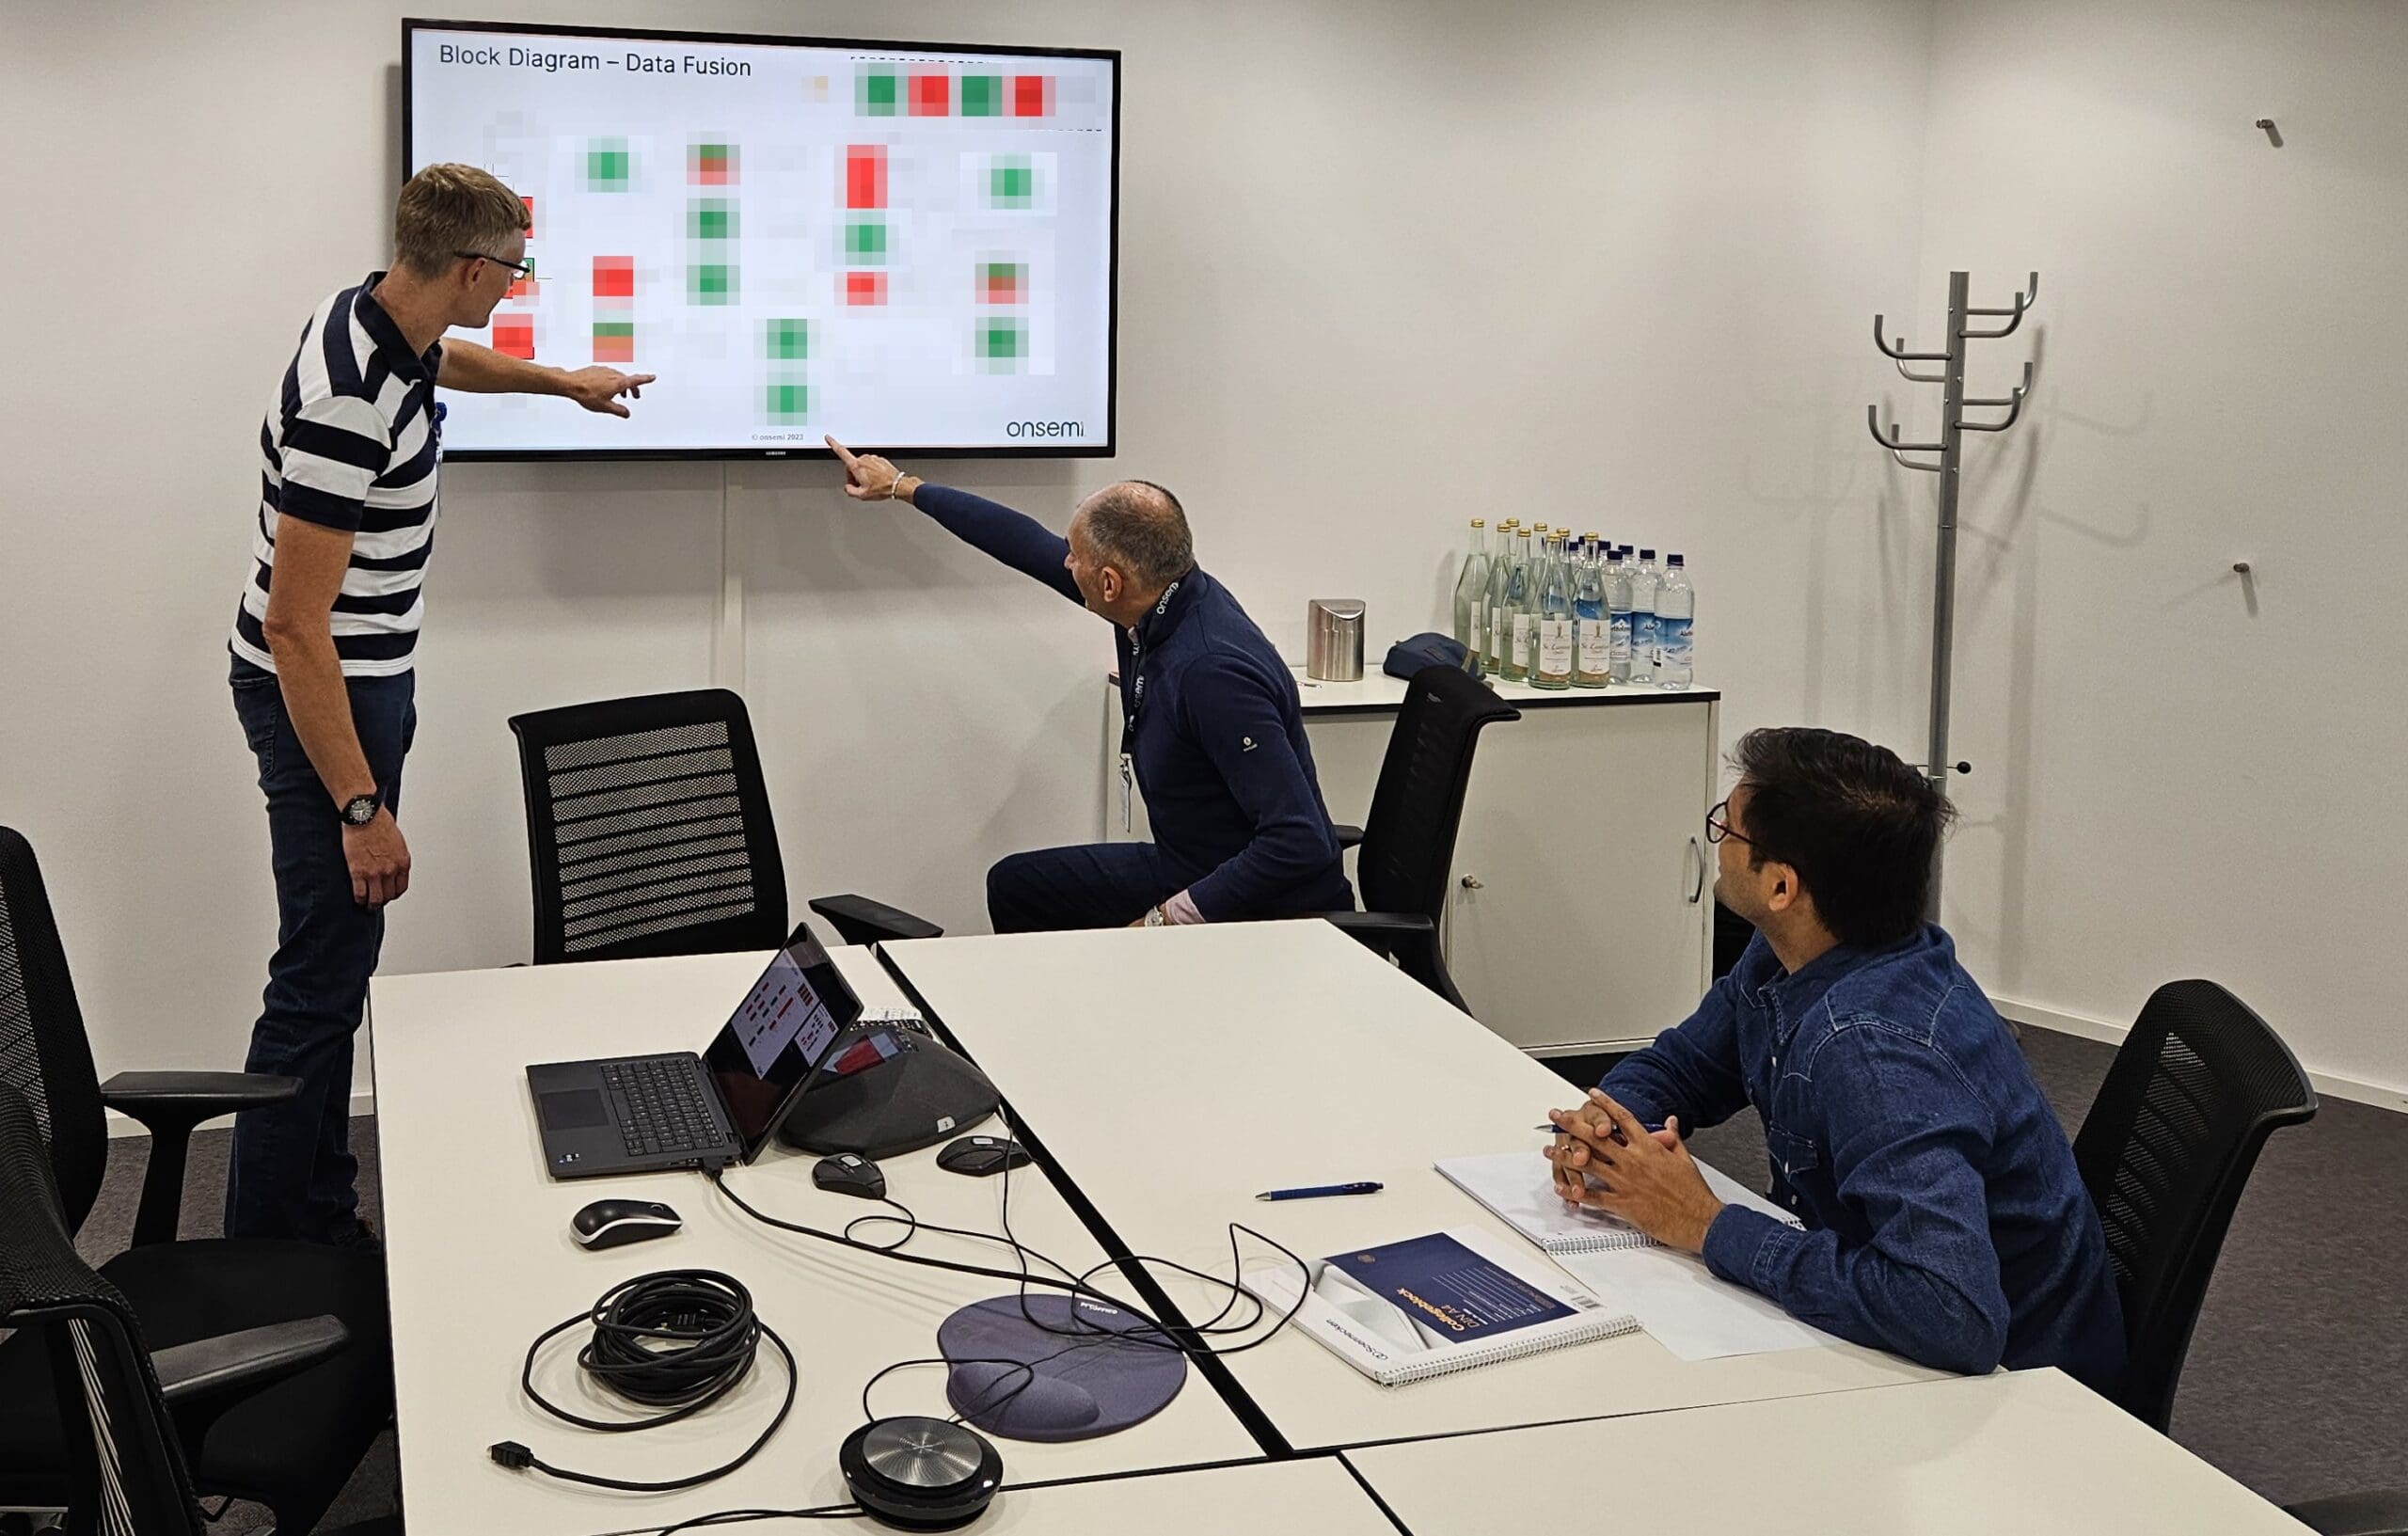 Matthias Ulmann Field Applications Manager with colleagues Riccardo and Sushrut doing a review of a block diagram proposal for a data fusion application